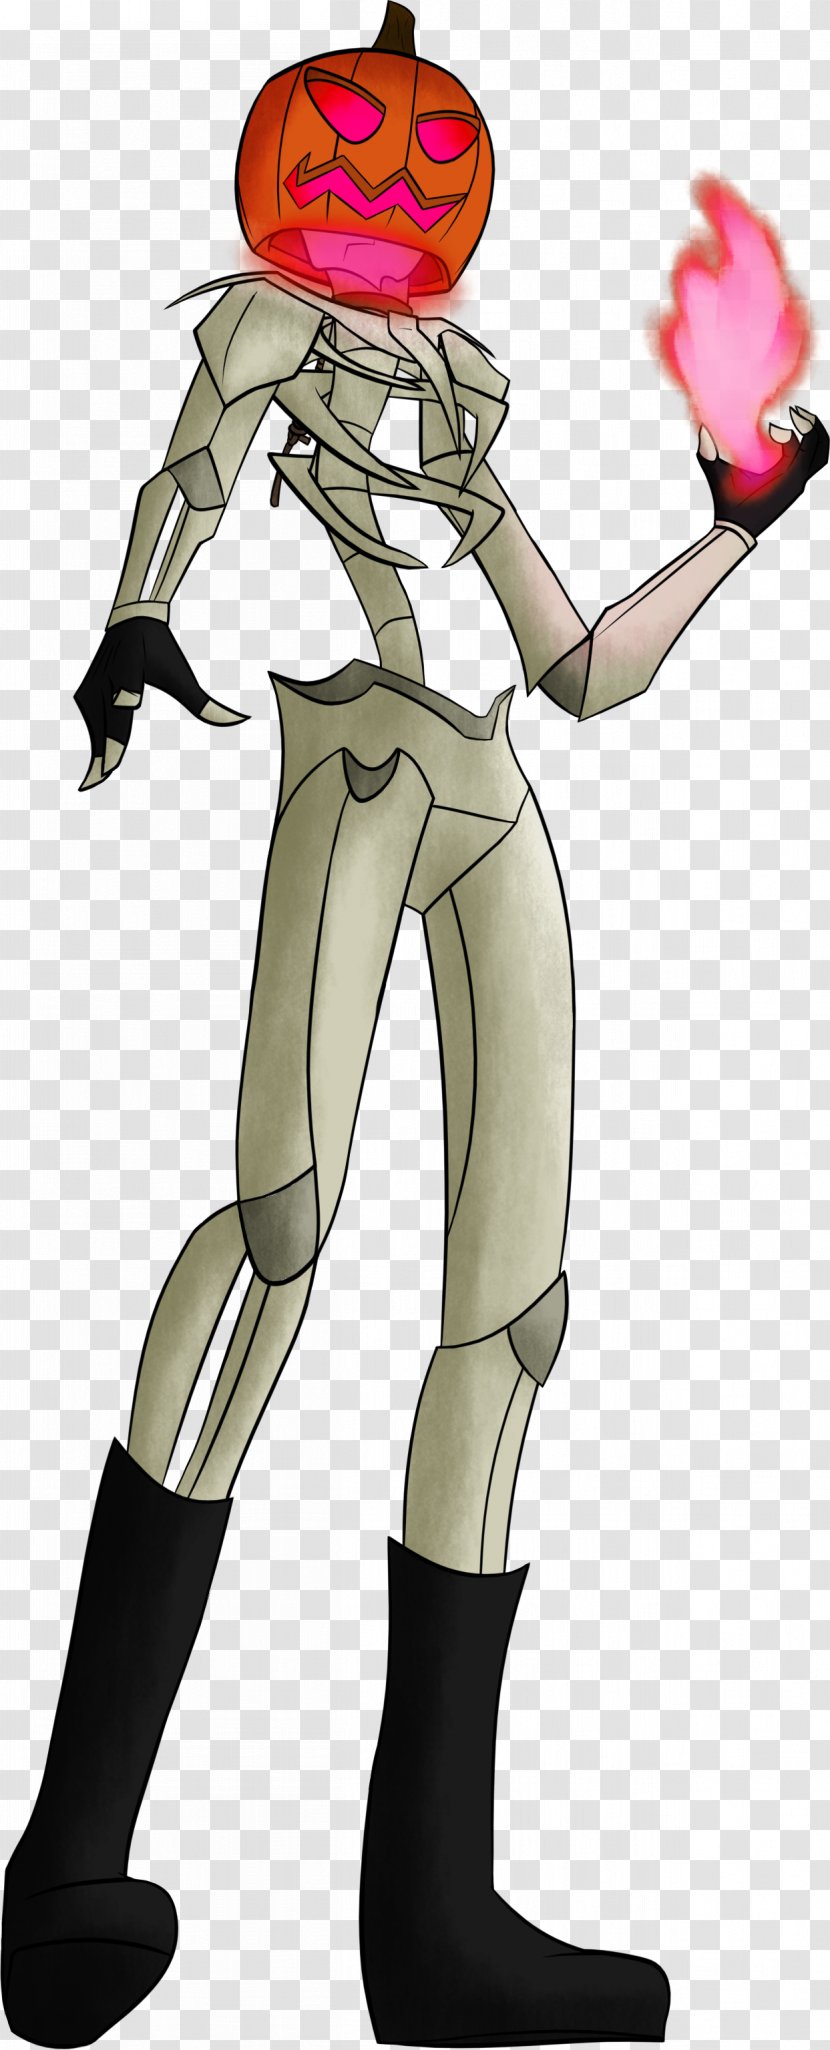 Vilgax Wikia Fiction Character - Mythical Creature - BEN 10 Transparent PNG